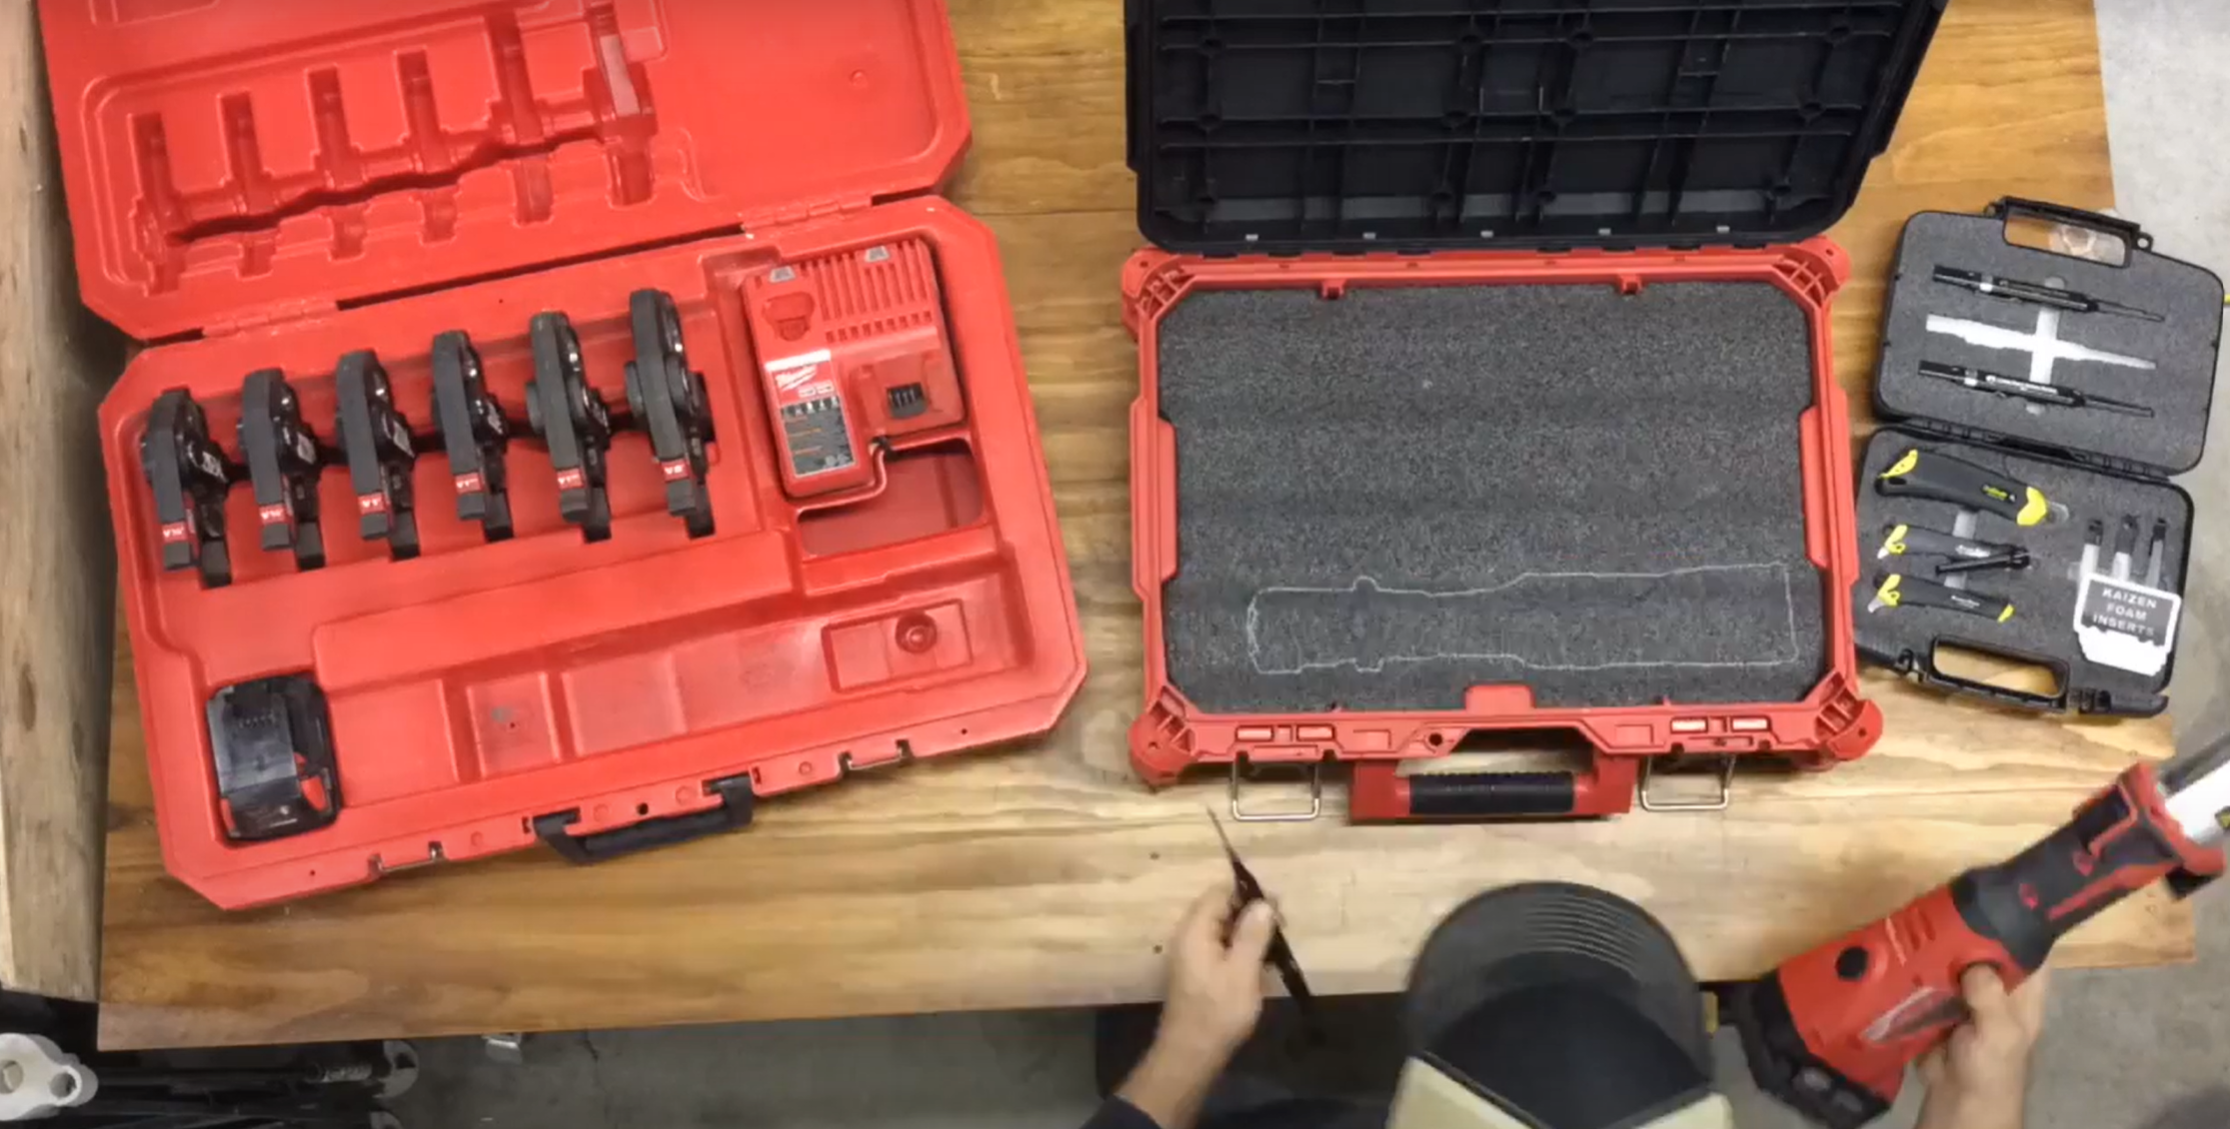 Kaizen Foam for Toolboxes and Storage Inserts